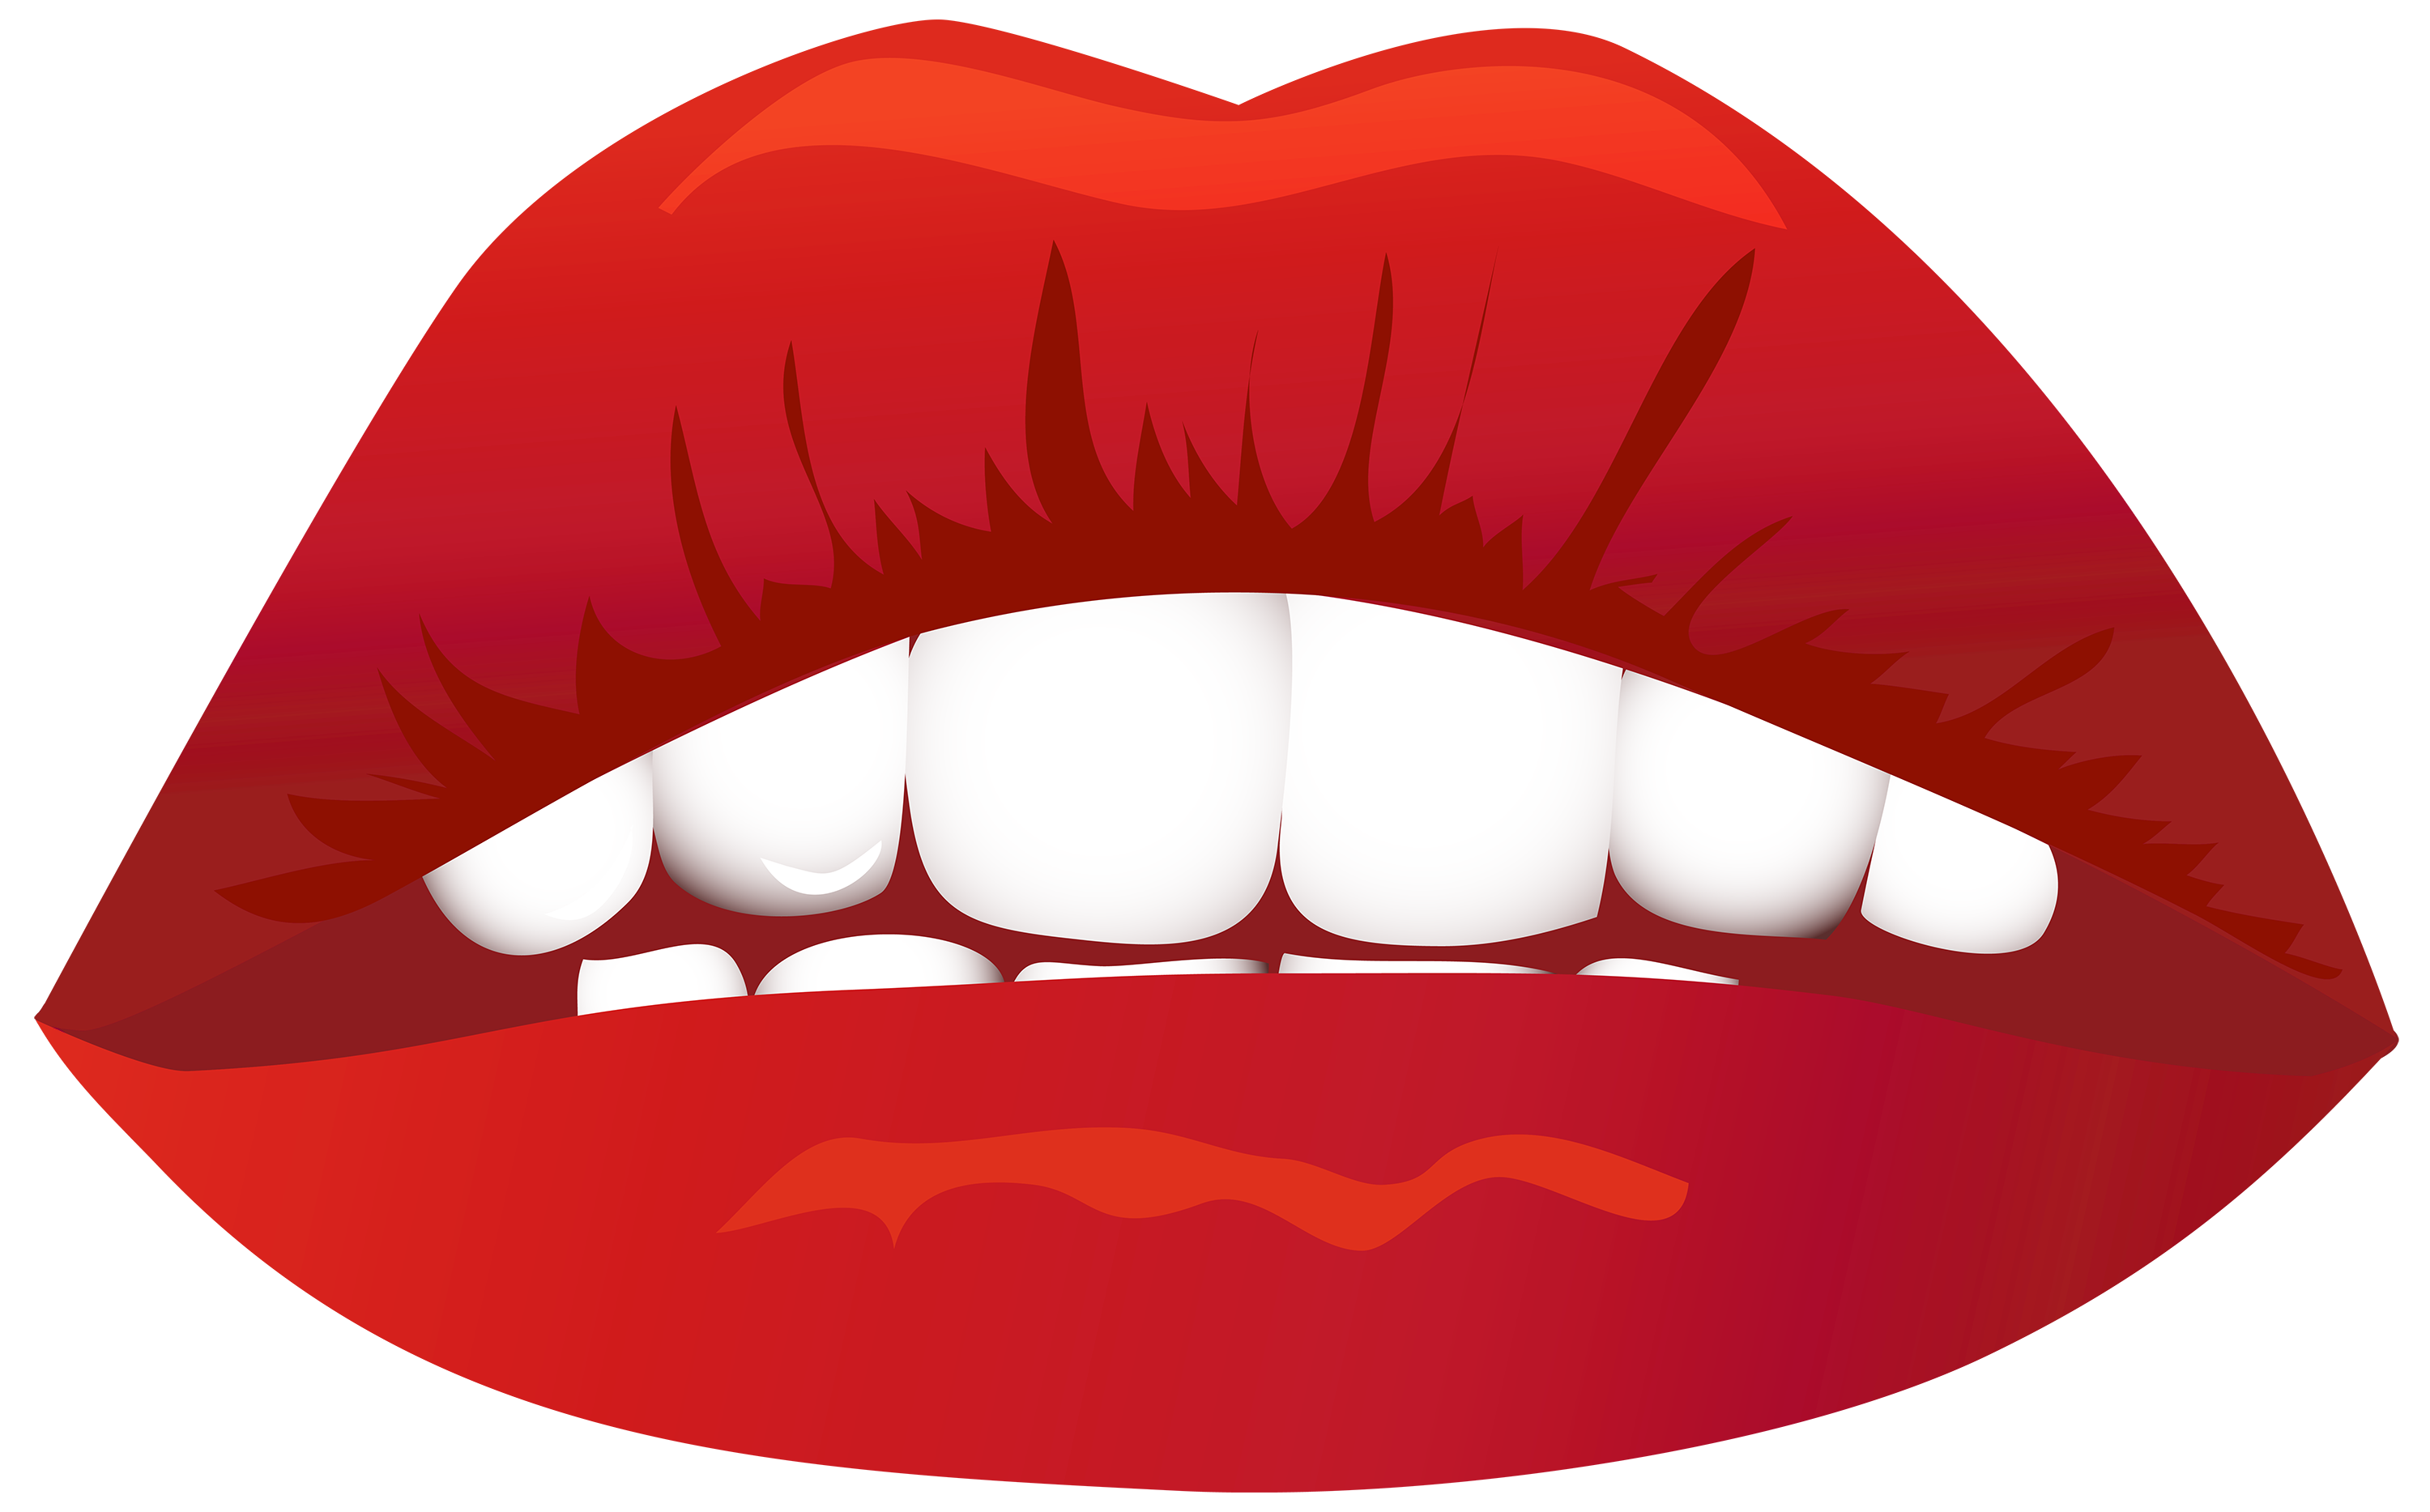 Lip Mouth Kiss Clip Art Lips Png Download 30001867 Free.